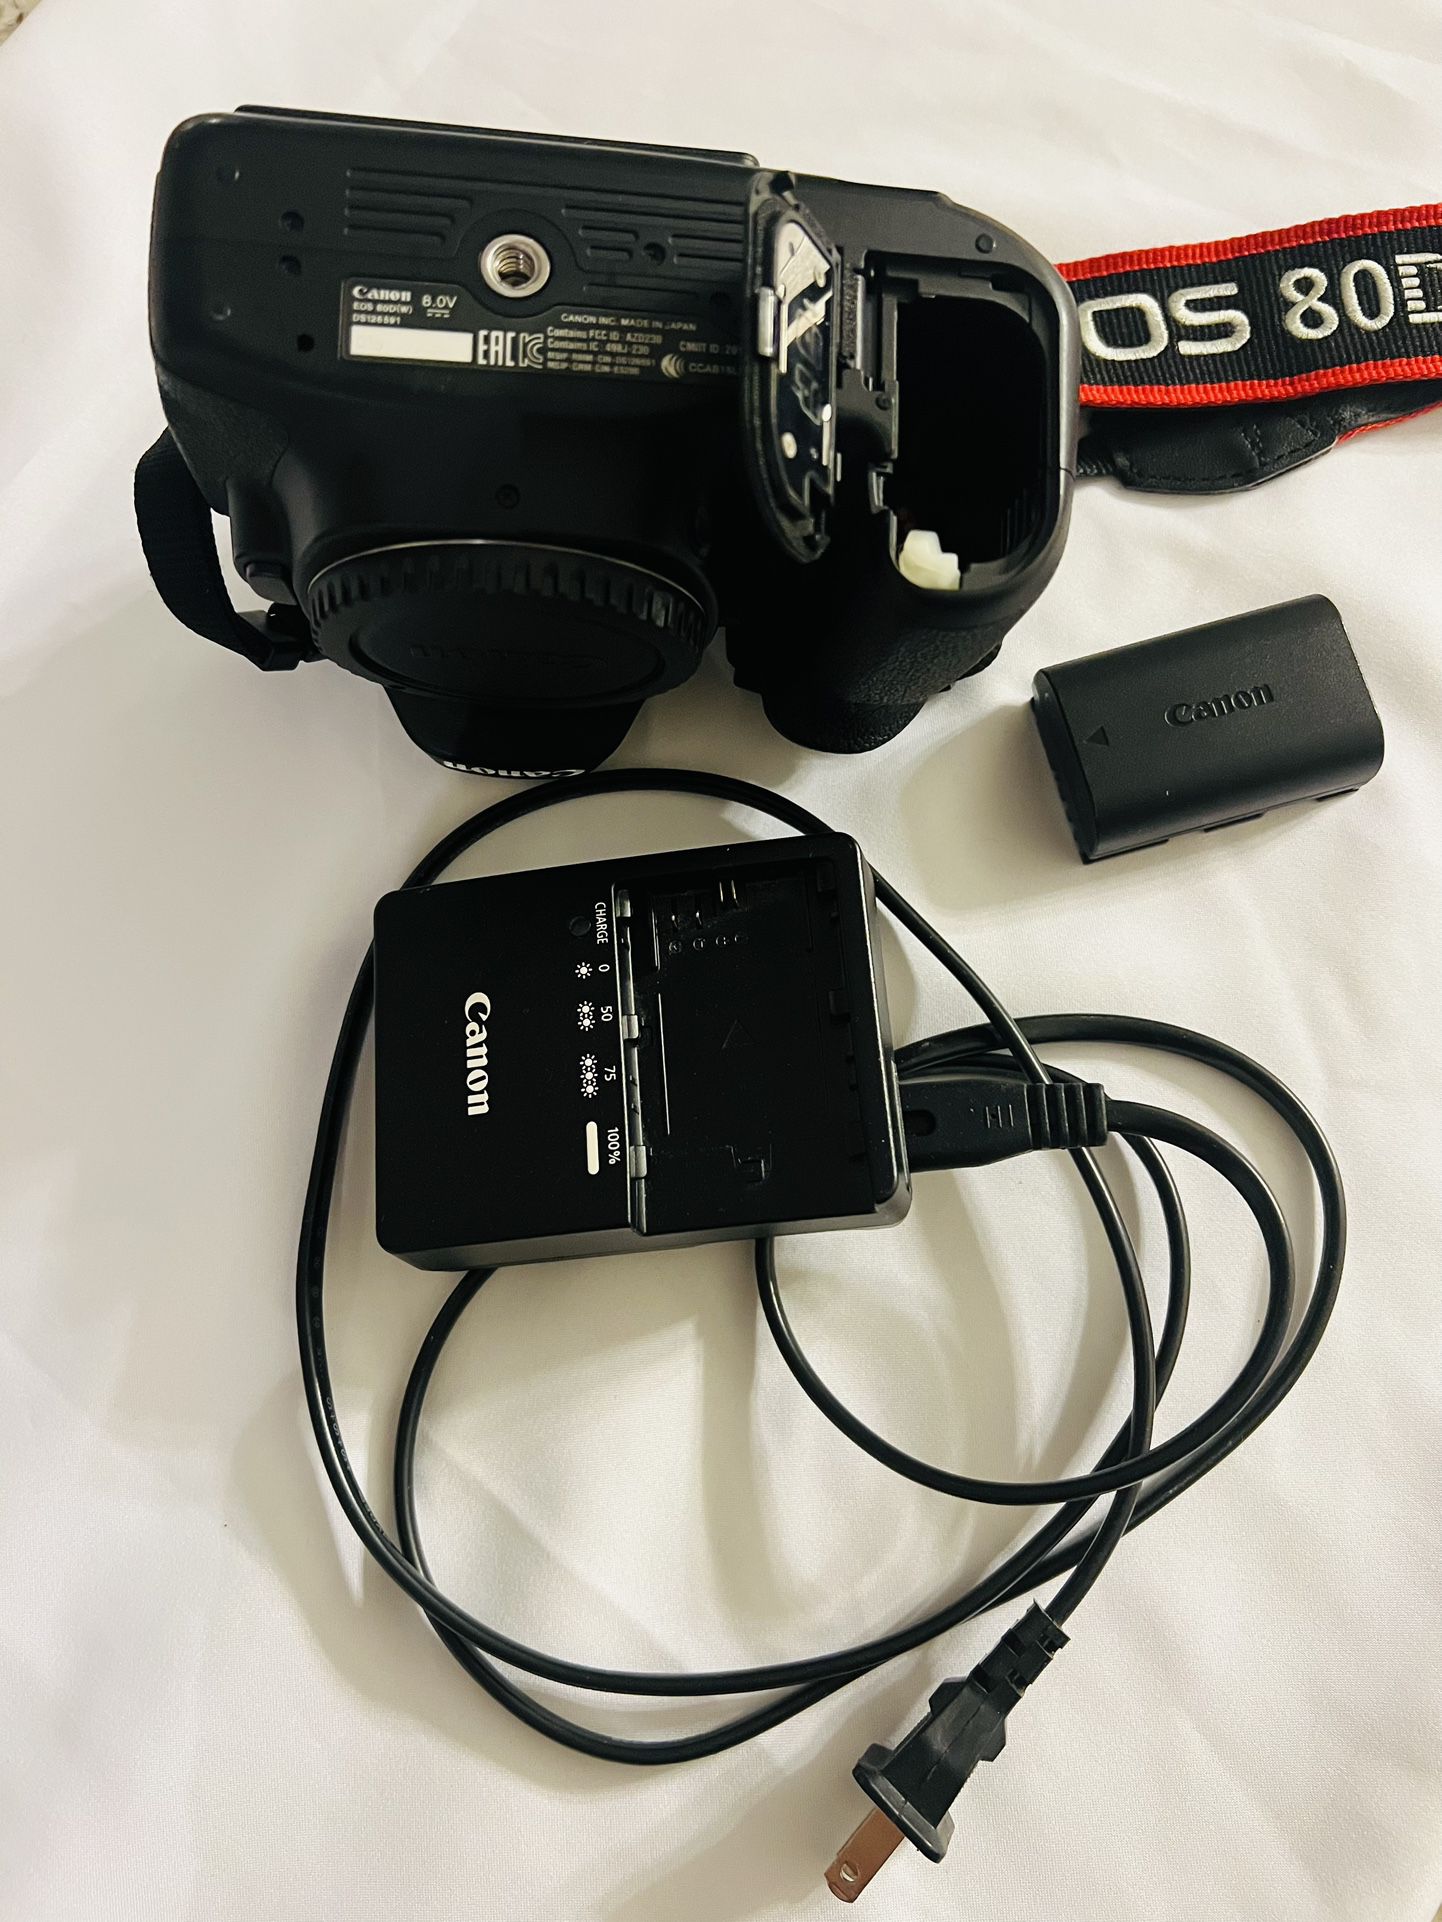 Canon EOS 80D DSLR Camera (Body Only) in Black